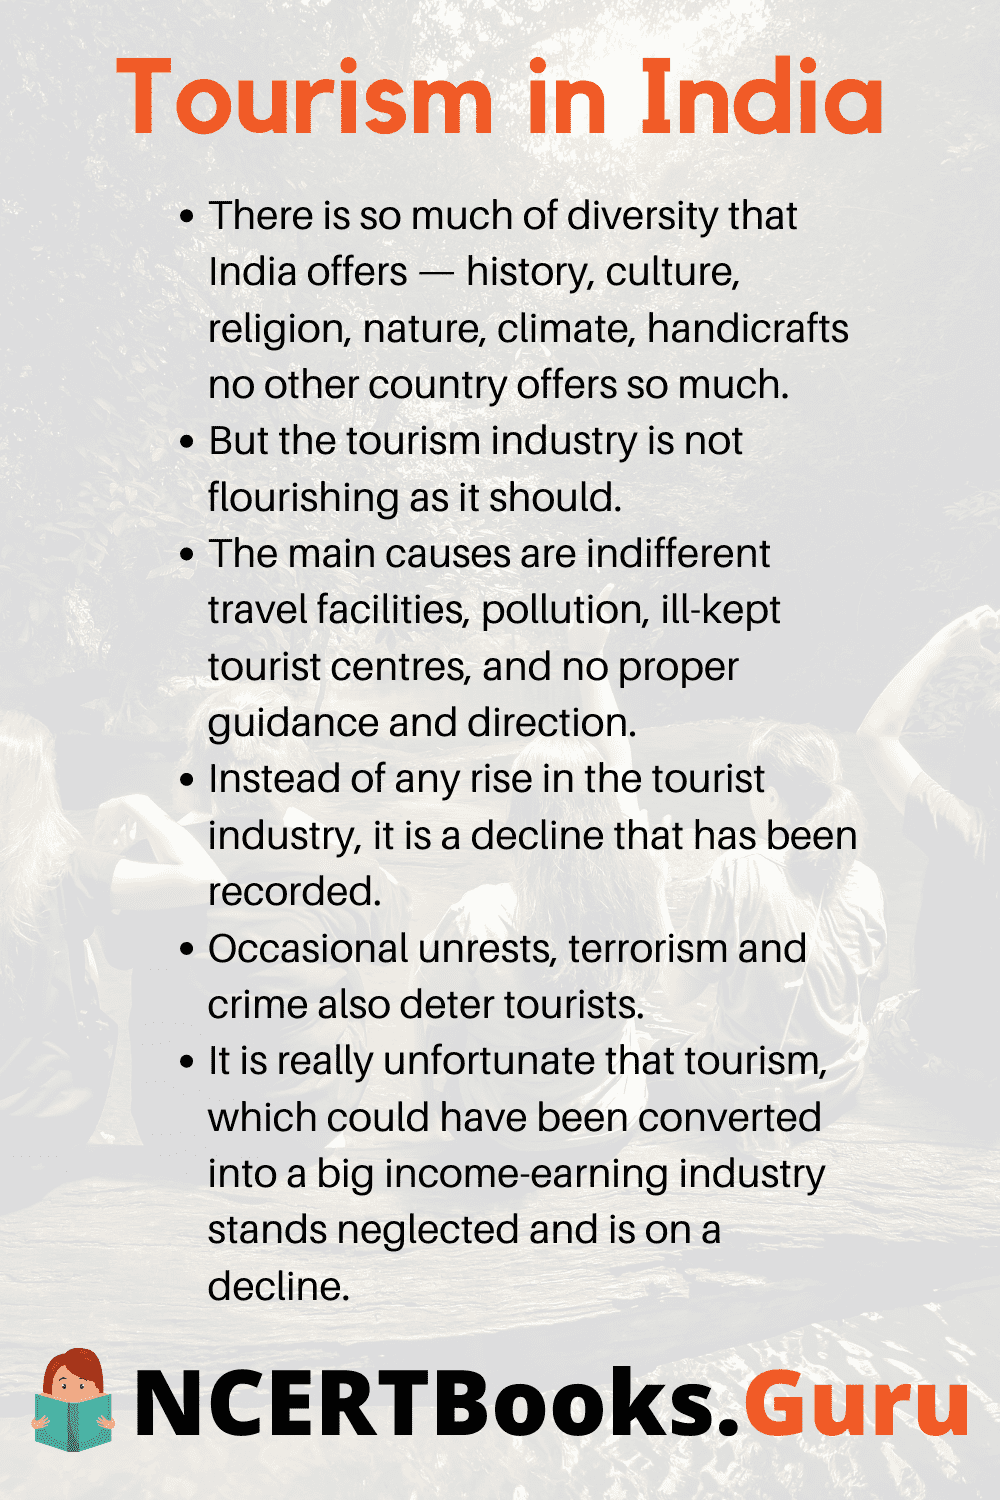 importance of tourism in india